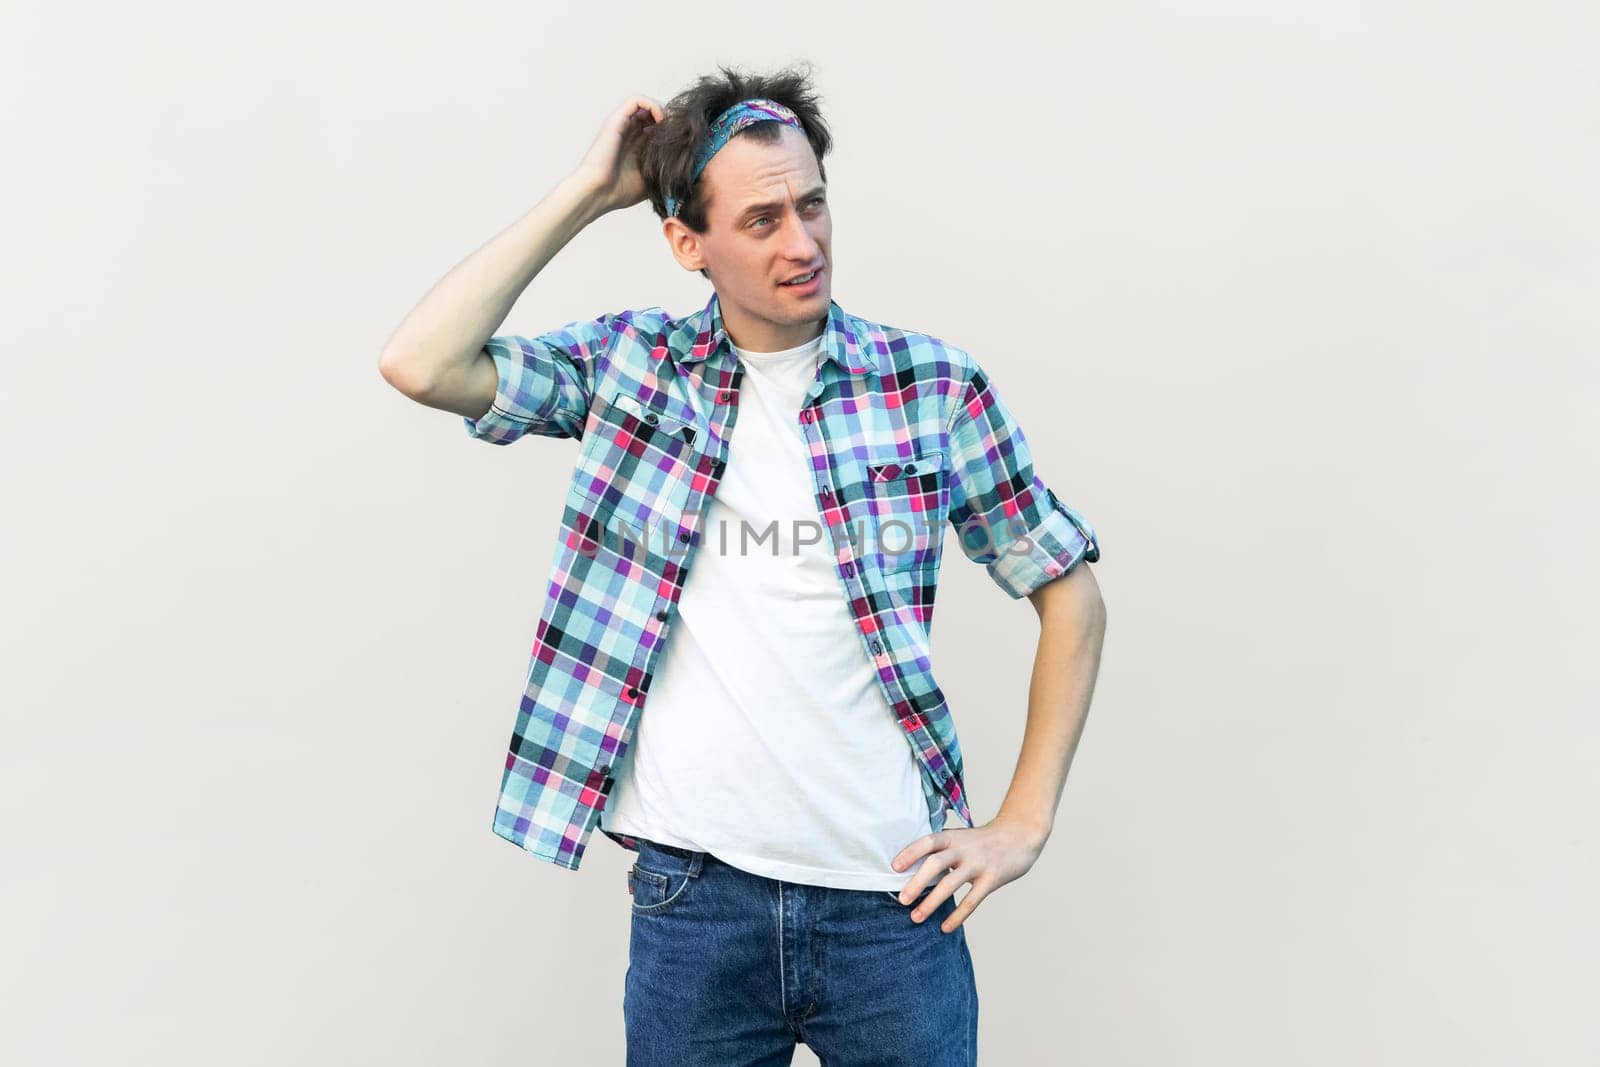 Indignant puzzled man rubbing head, tries to remember necessary information, looks in displeasure, wearing blue checkered shirt and headband. Indoor studio shot isolated on gray background.